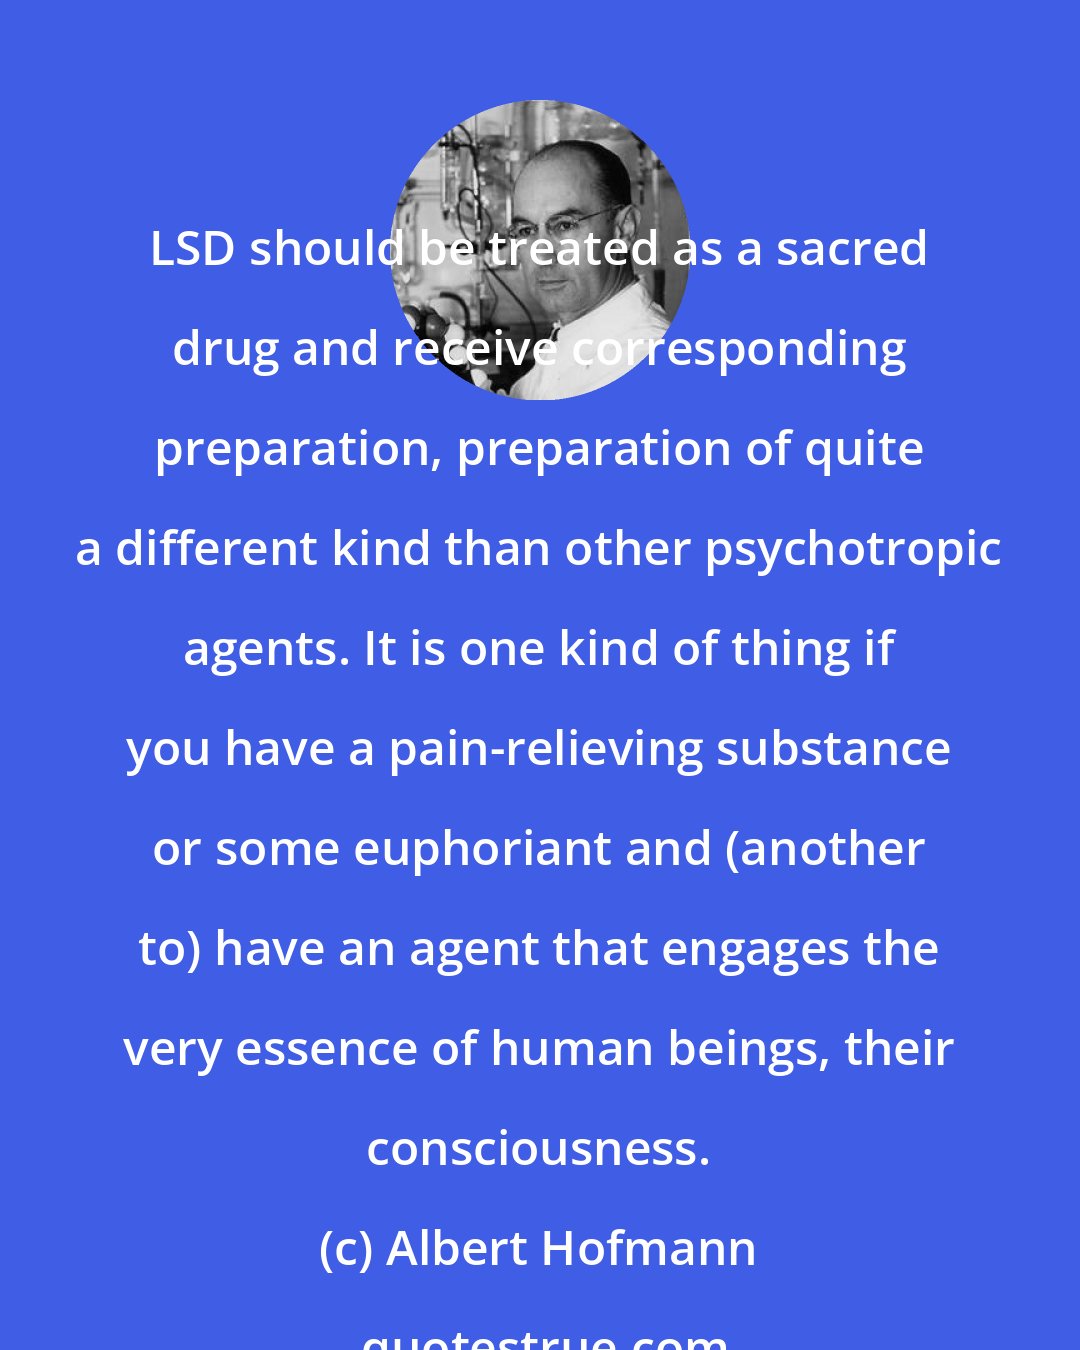 Albert Hofmann: LSD should be treated as a sacred drug and receive corresponding preparation, preparation of quite a different kind than other psychotropic agents. It is one kind of thing if you have a pain-relieving substance or some euphoriant and (another to) have an agent that engages the very essence of human beings, their consciousness.